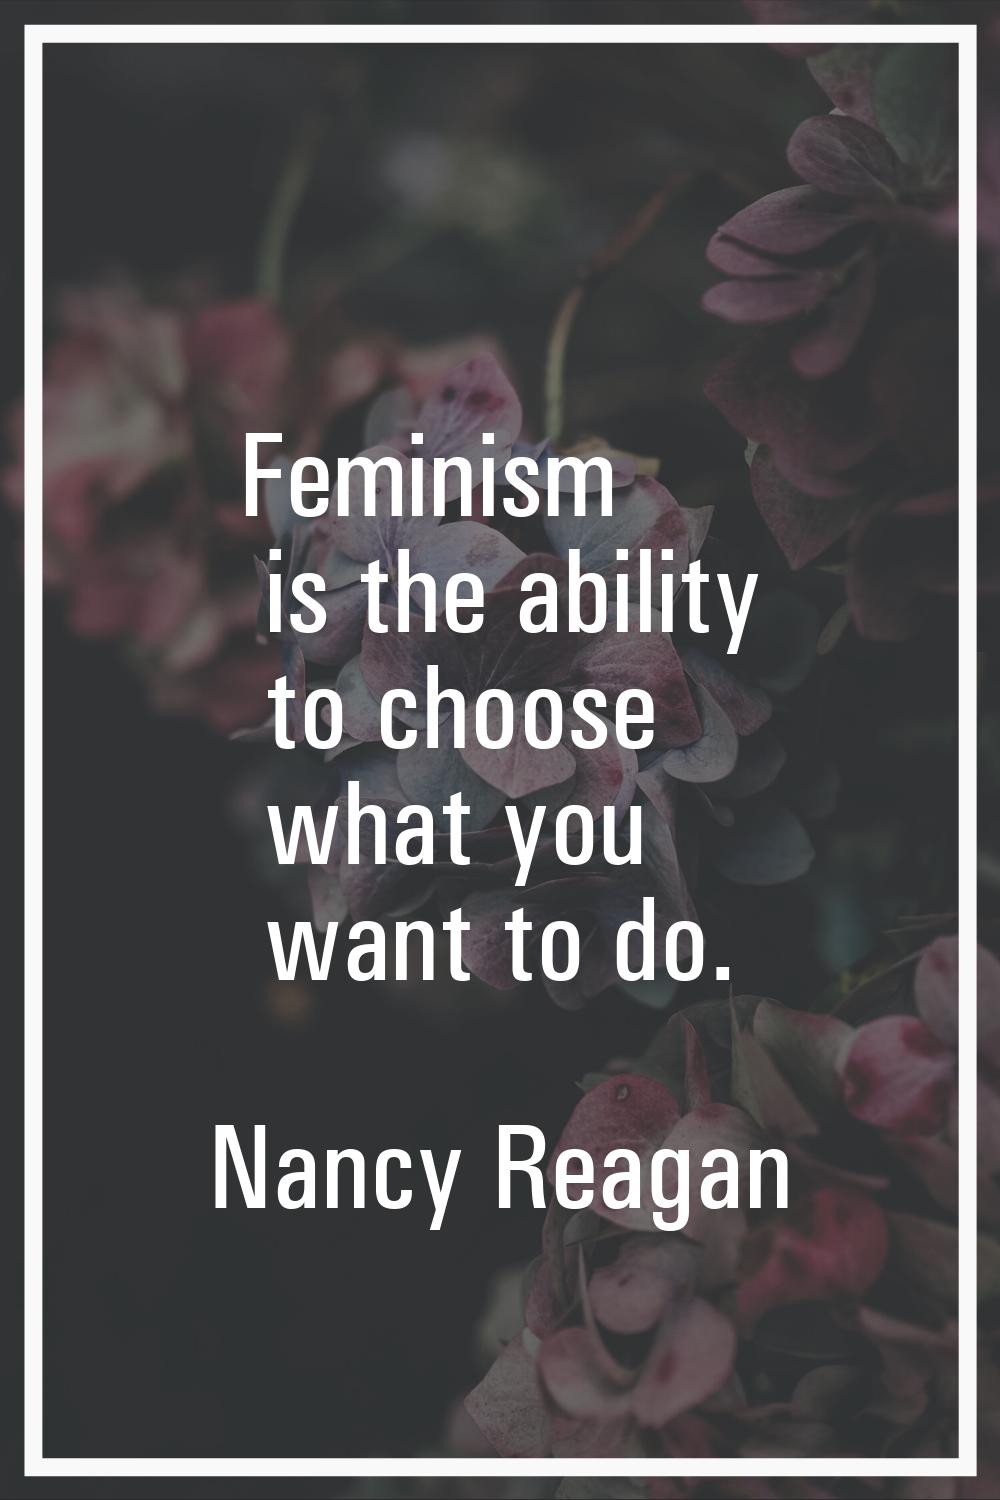 Feminism is the ability to choose what you want to do.